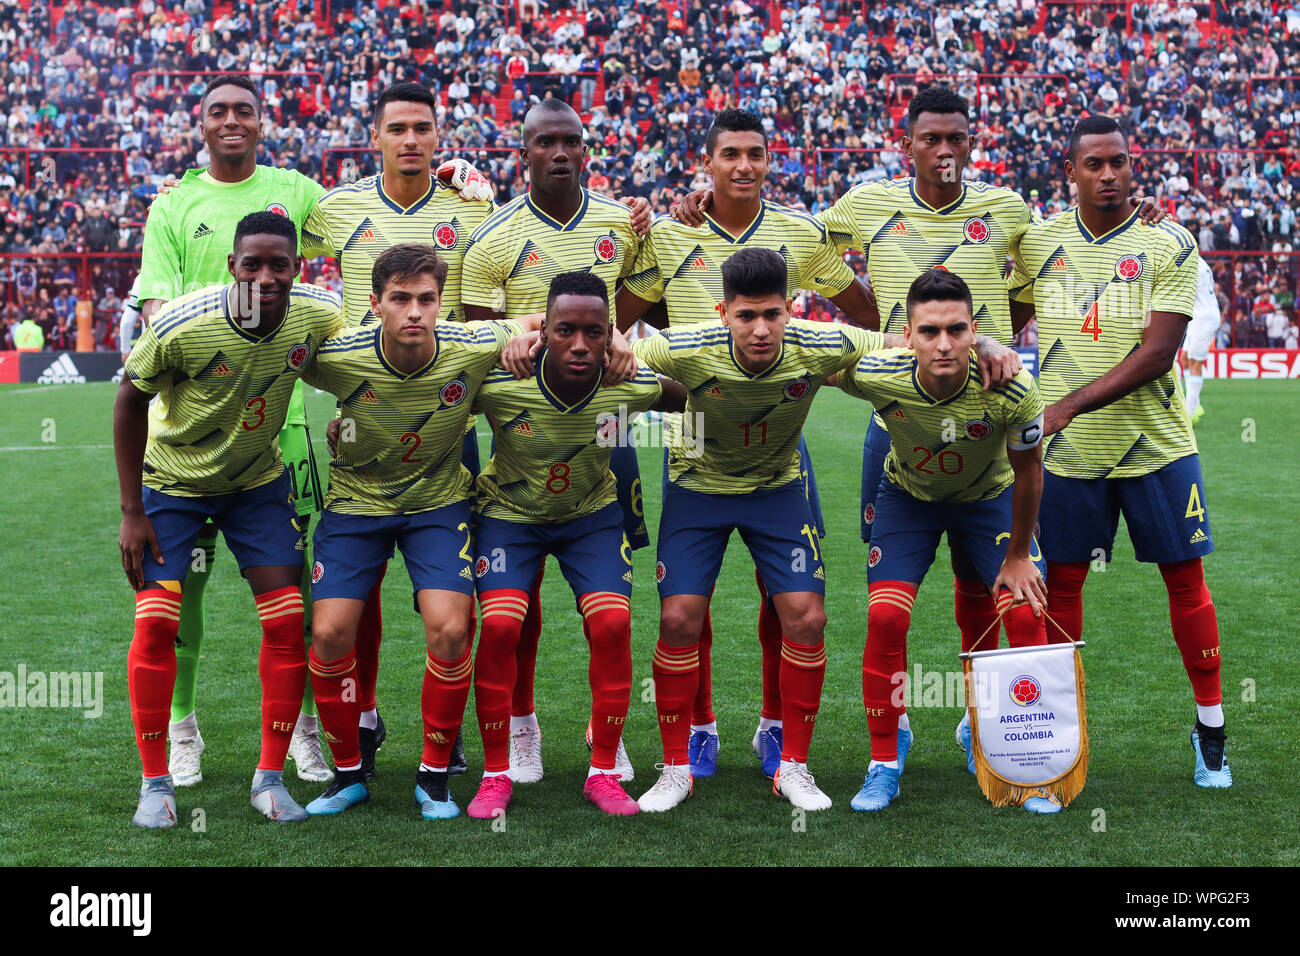 BUENOS AIRES, 08.09.2019: Team of Colombia before the match between Argentina and Colombia for friendly match on Diego Maradona Stadium in Buenos Aire Stock Photo